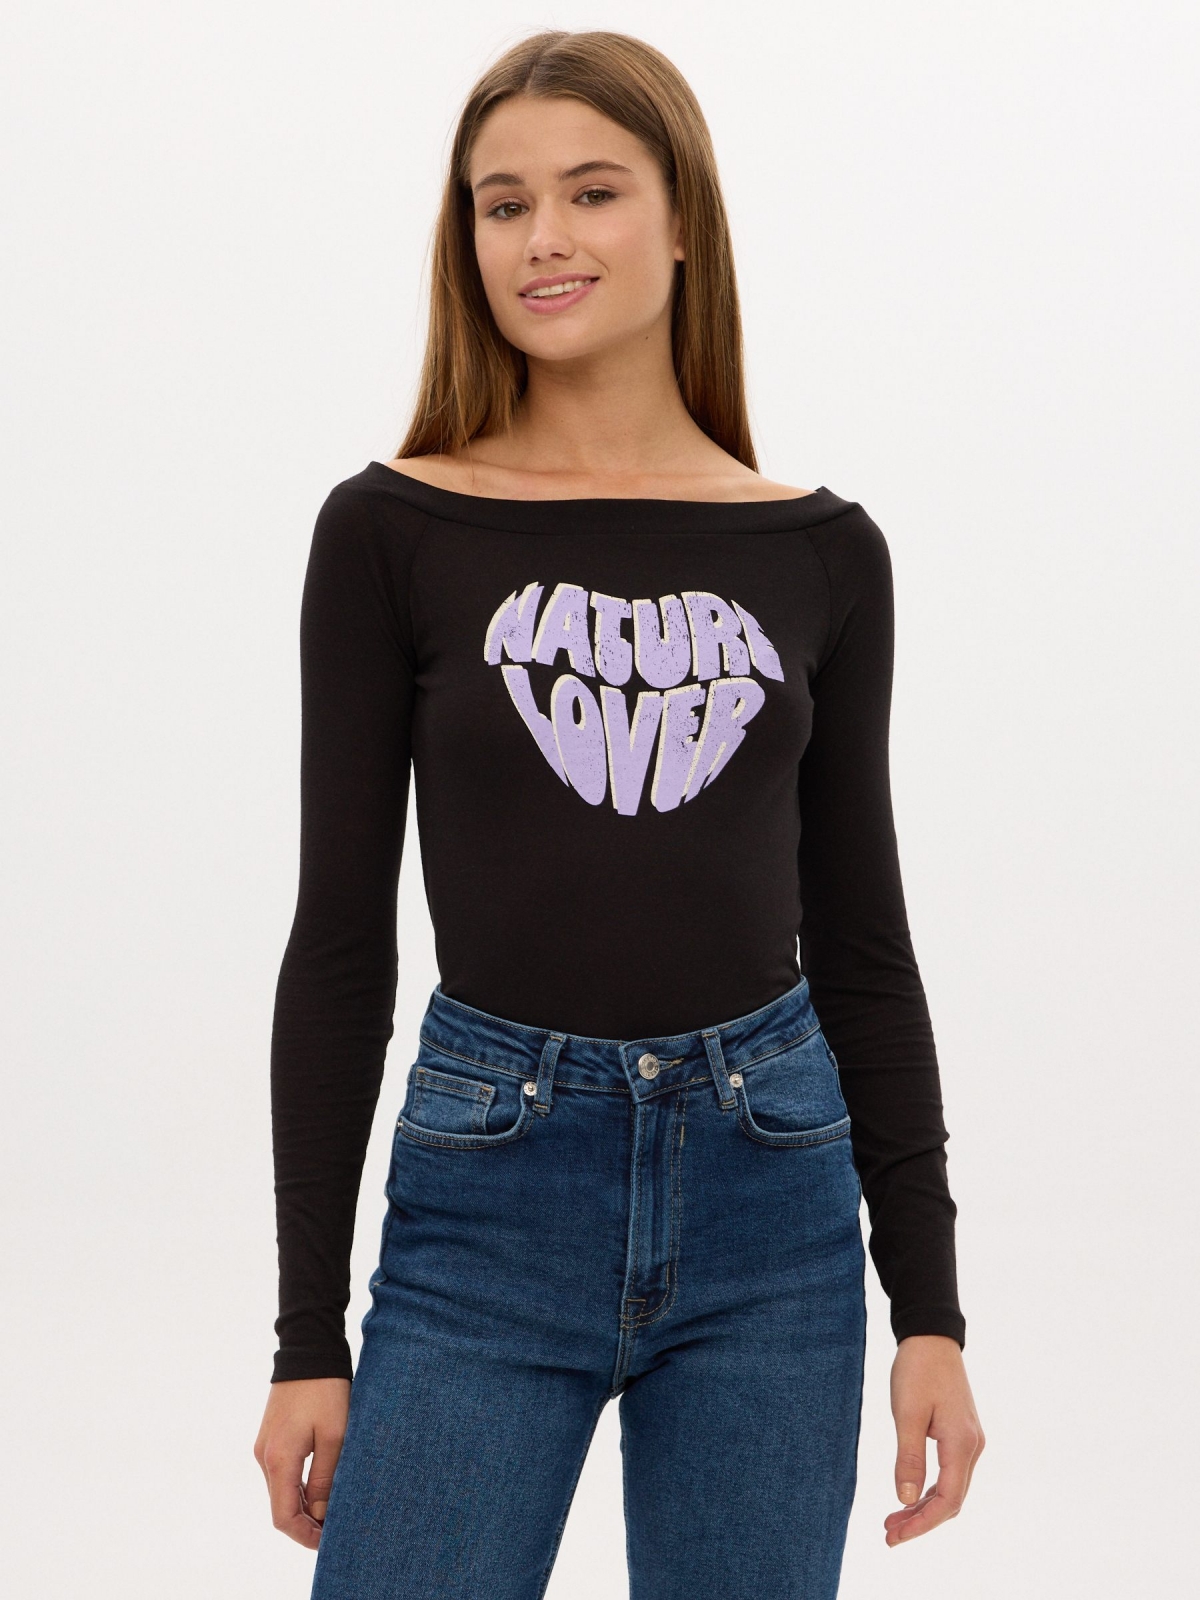 Natural Lover T-shirt black middle front view